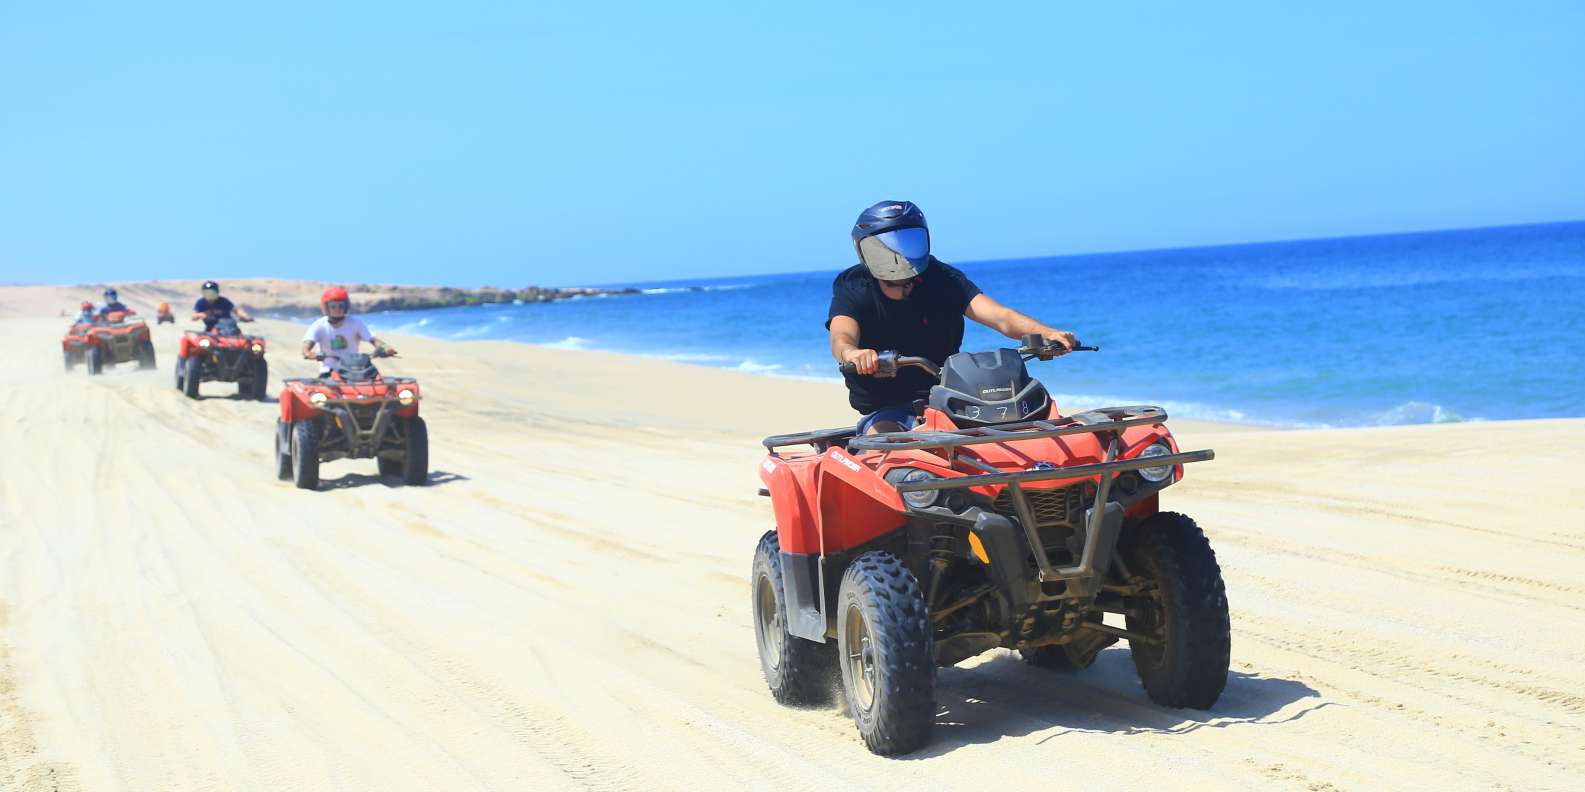 Cabo San Lucas: ATV Beach and Dune Tour with Taco Buffet | GetYourGuide